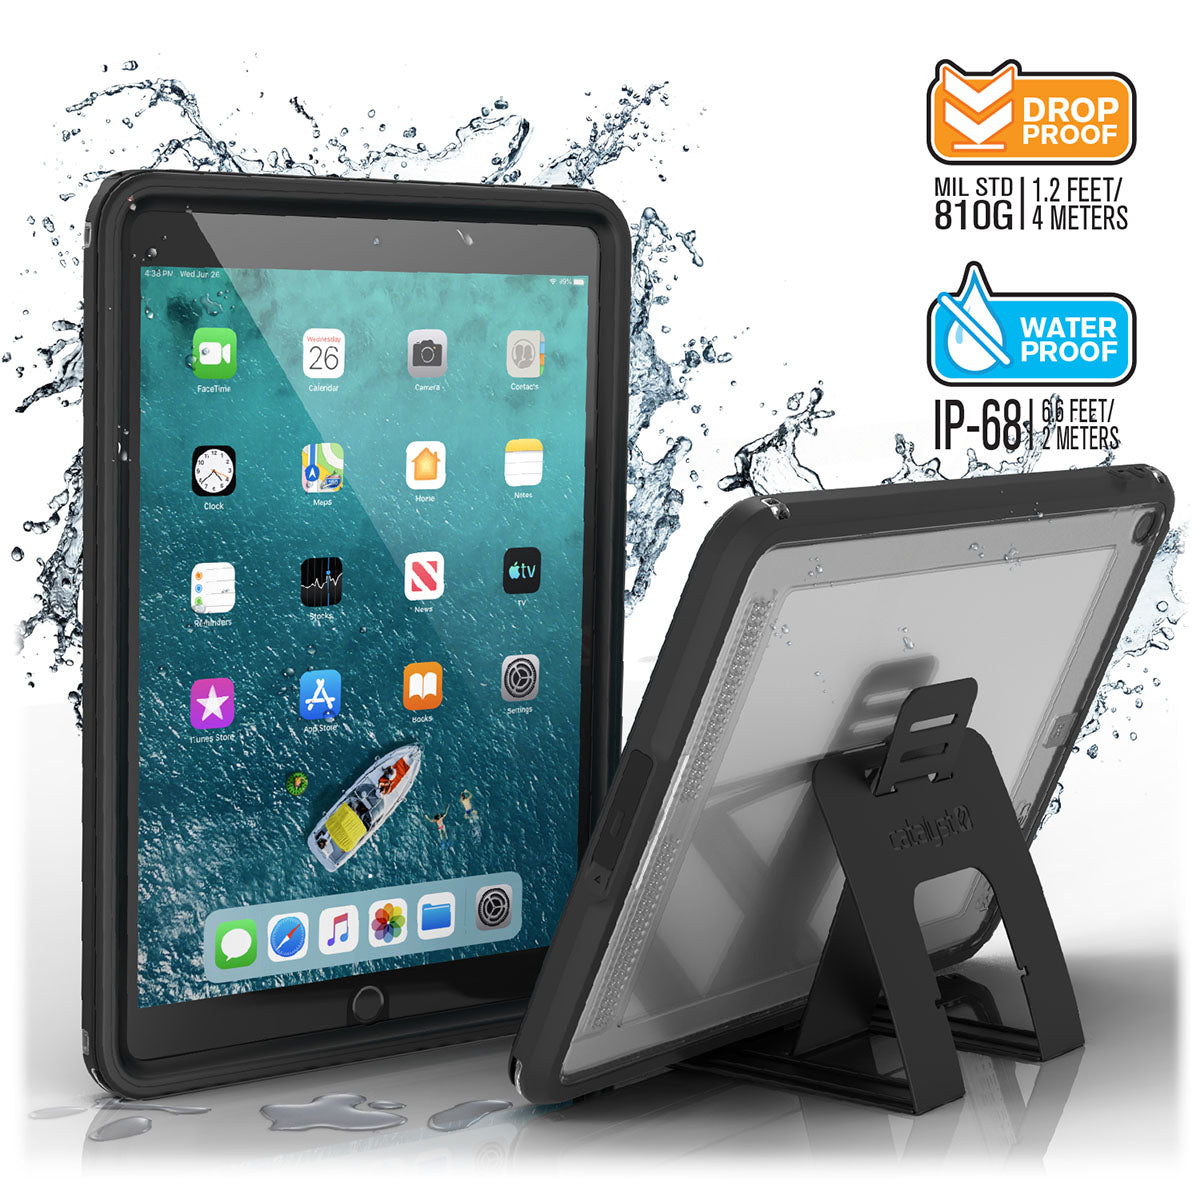 catalyst ipad air gen 3 10.5 waterproof case stealth black front and back view with stand and splashes of water text reads drop proof mil std 810g 1.2 feet 4 meters waterproof ip68 6.6 feet 2 meters